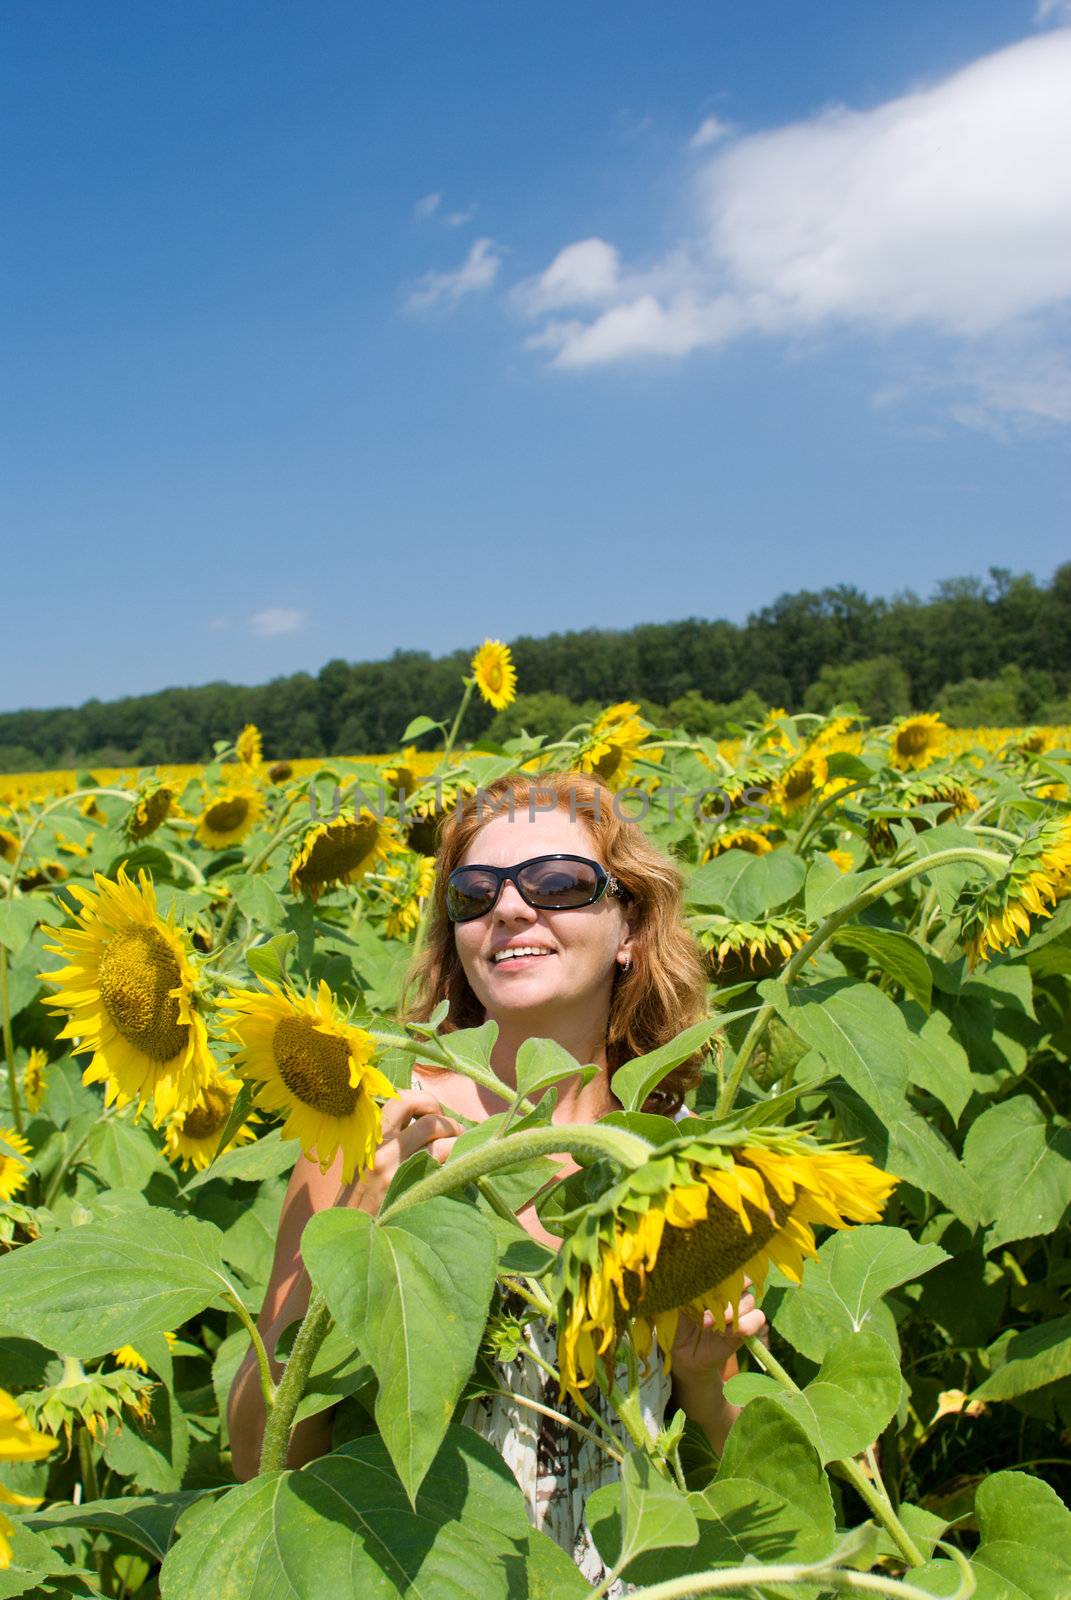 The beautiful woman in the field of sunflowers by BIG_TAU